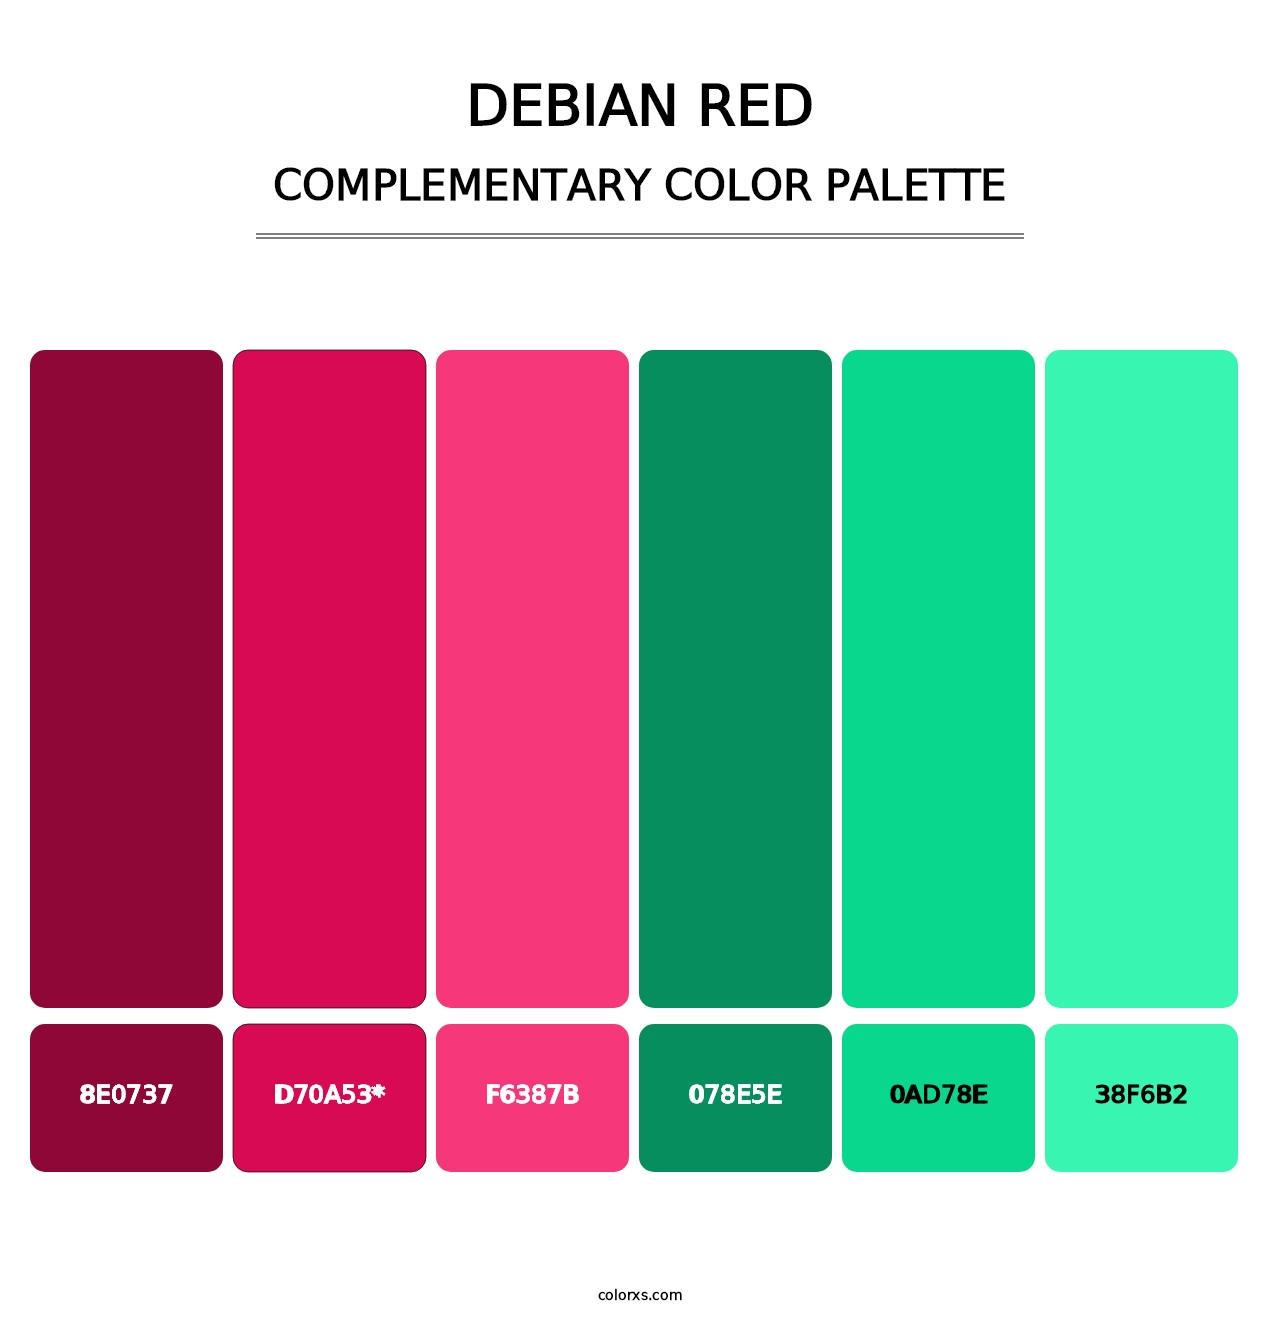 Debian red - Complementary Color Palette